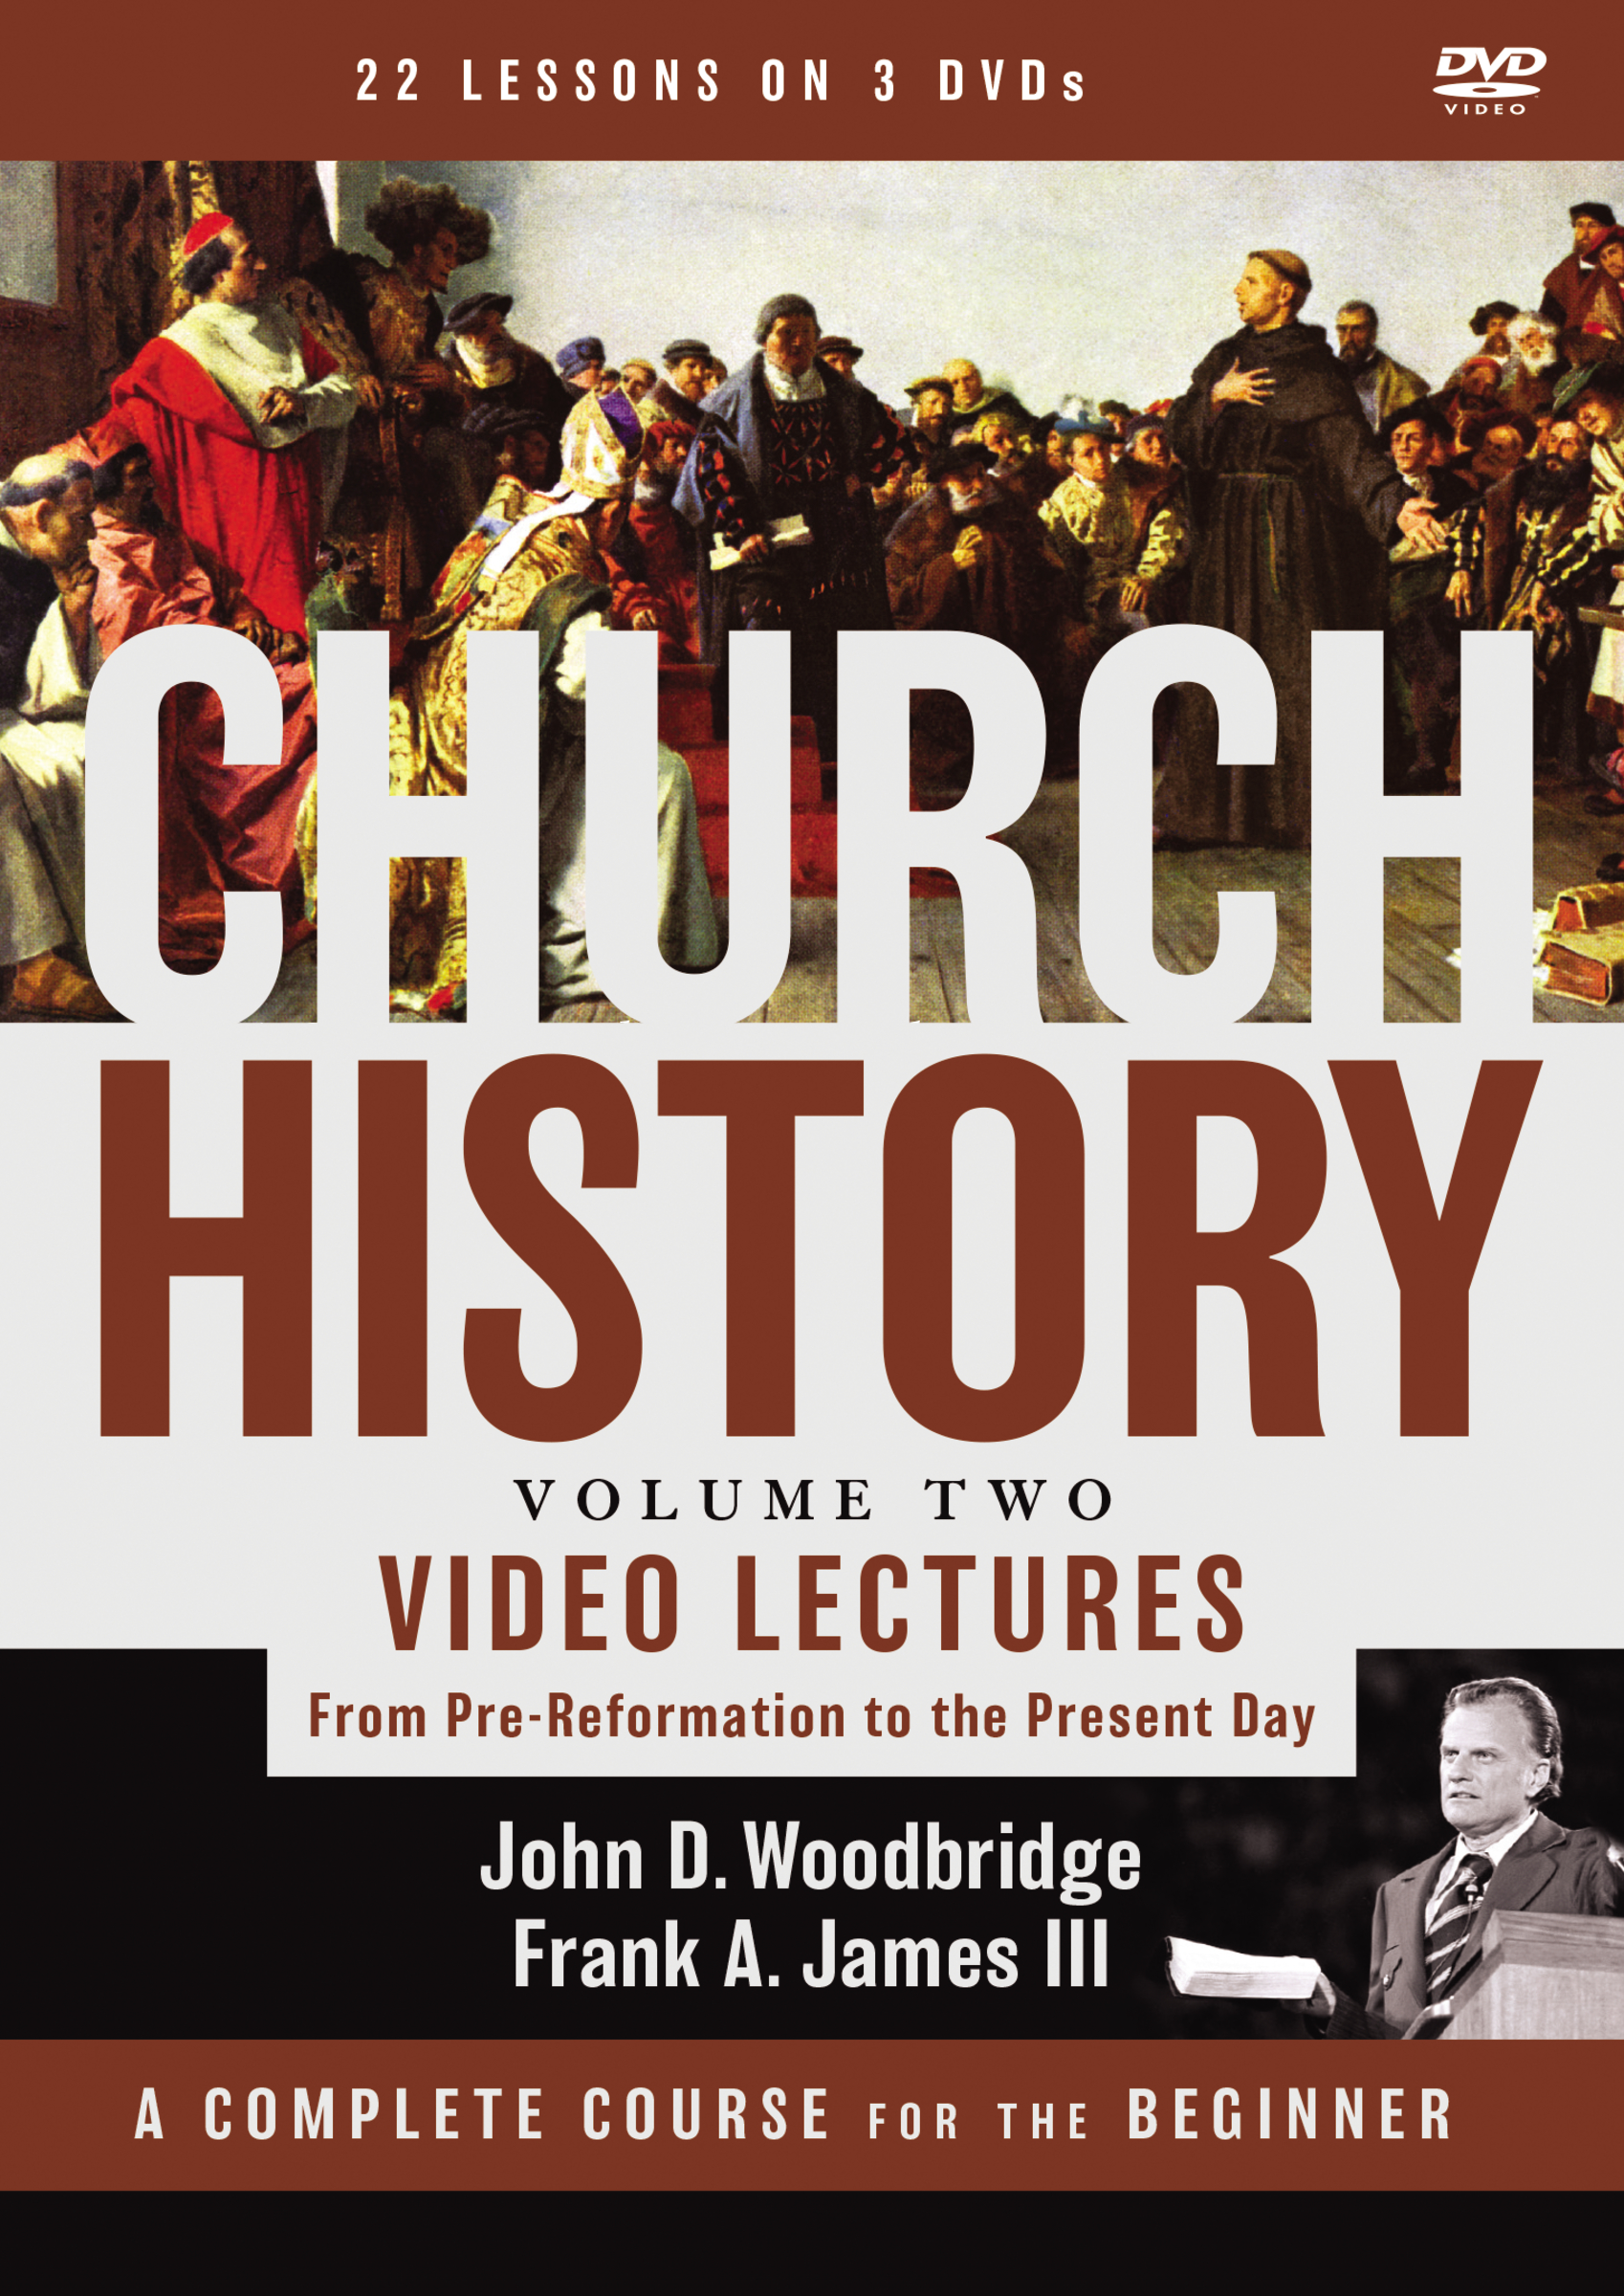 Church History, Volume Two Video Lectures